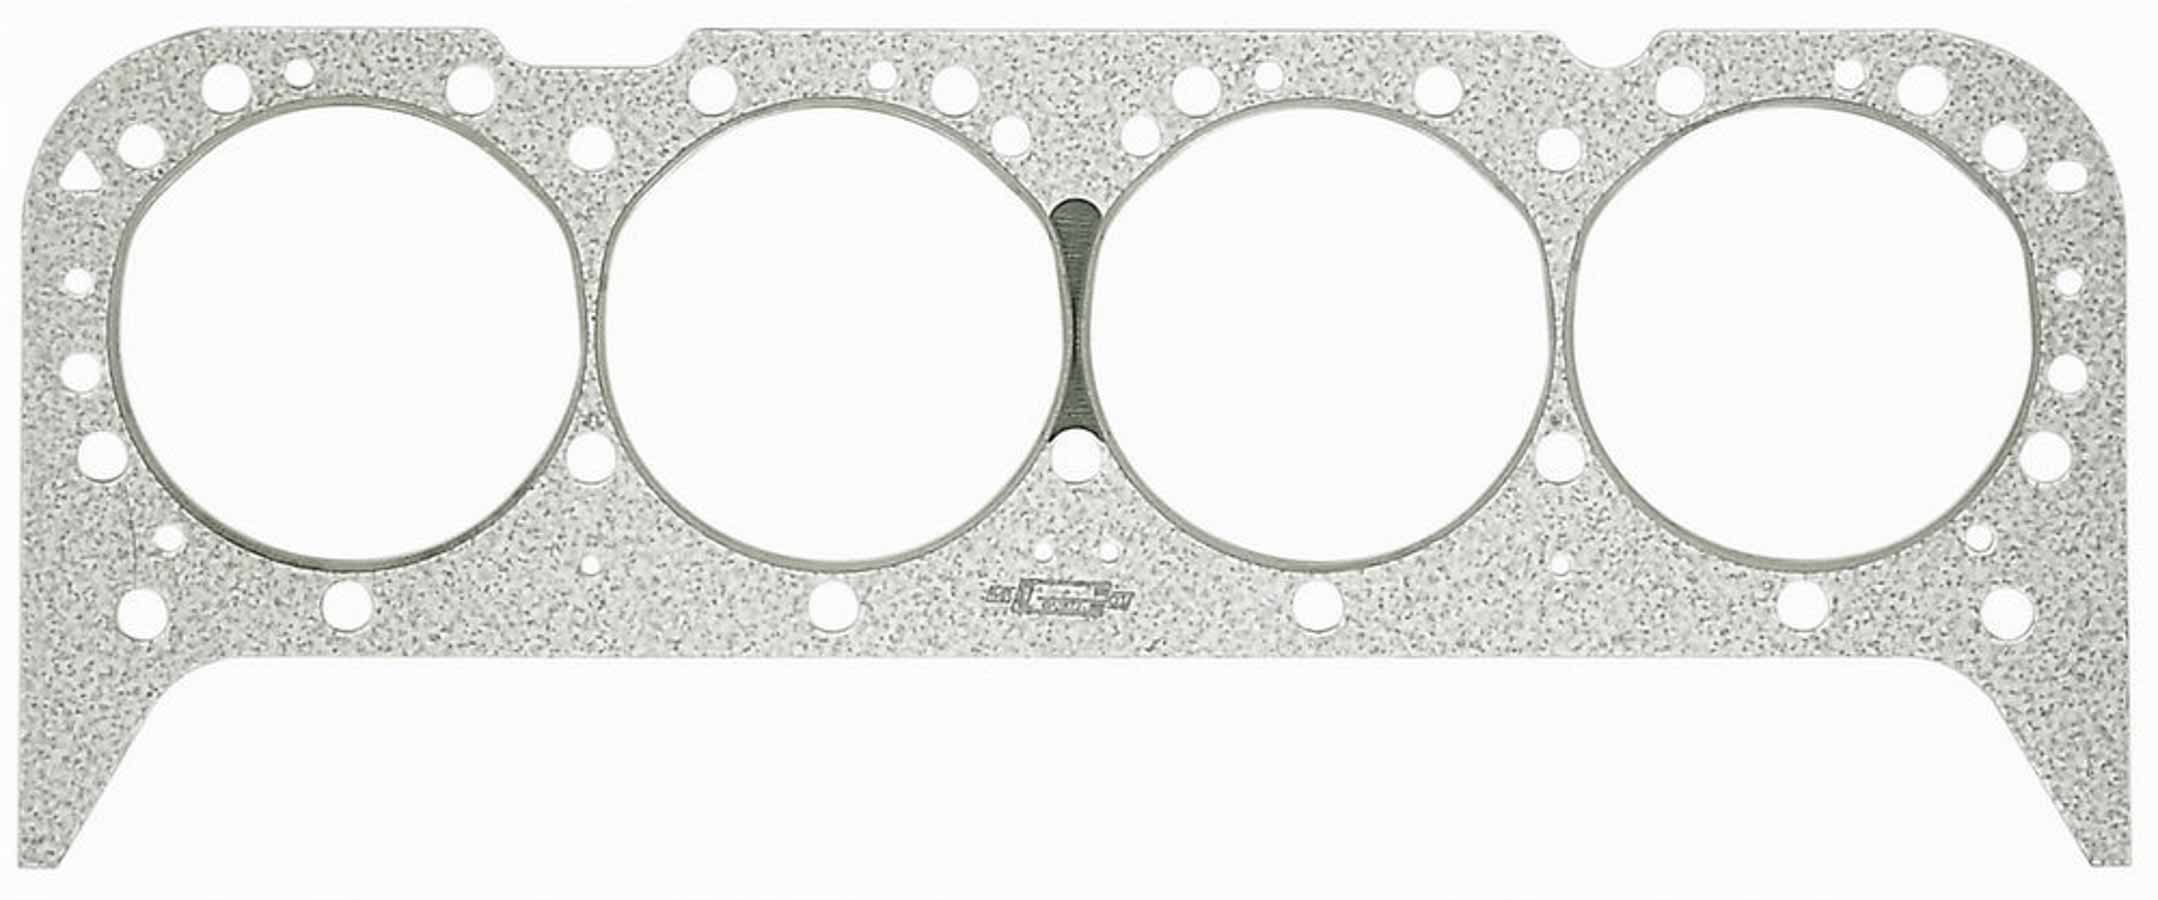 Mr. Gasket 5800G Cylinder Head Gasket, Ultra-Seal, 4.130 in Bore, 0.038 in Compression Thickness, Rubber Coated Graphite, Small Block Chevy, Each